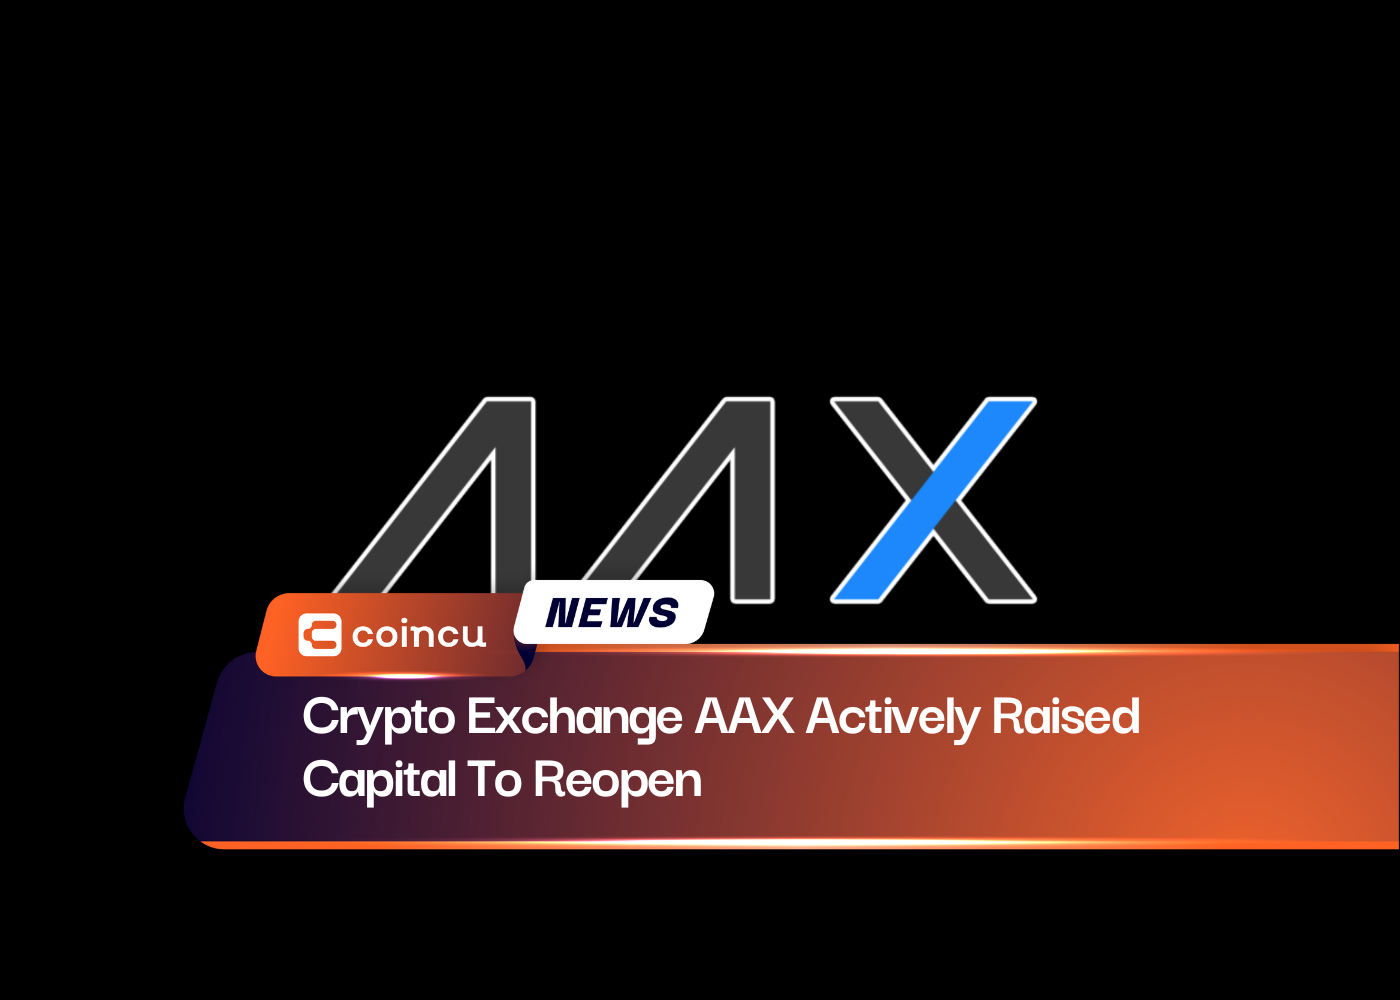 Crypto Exchange AAX Actively Raised Capital To Reopen